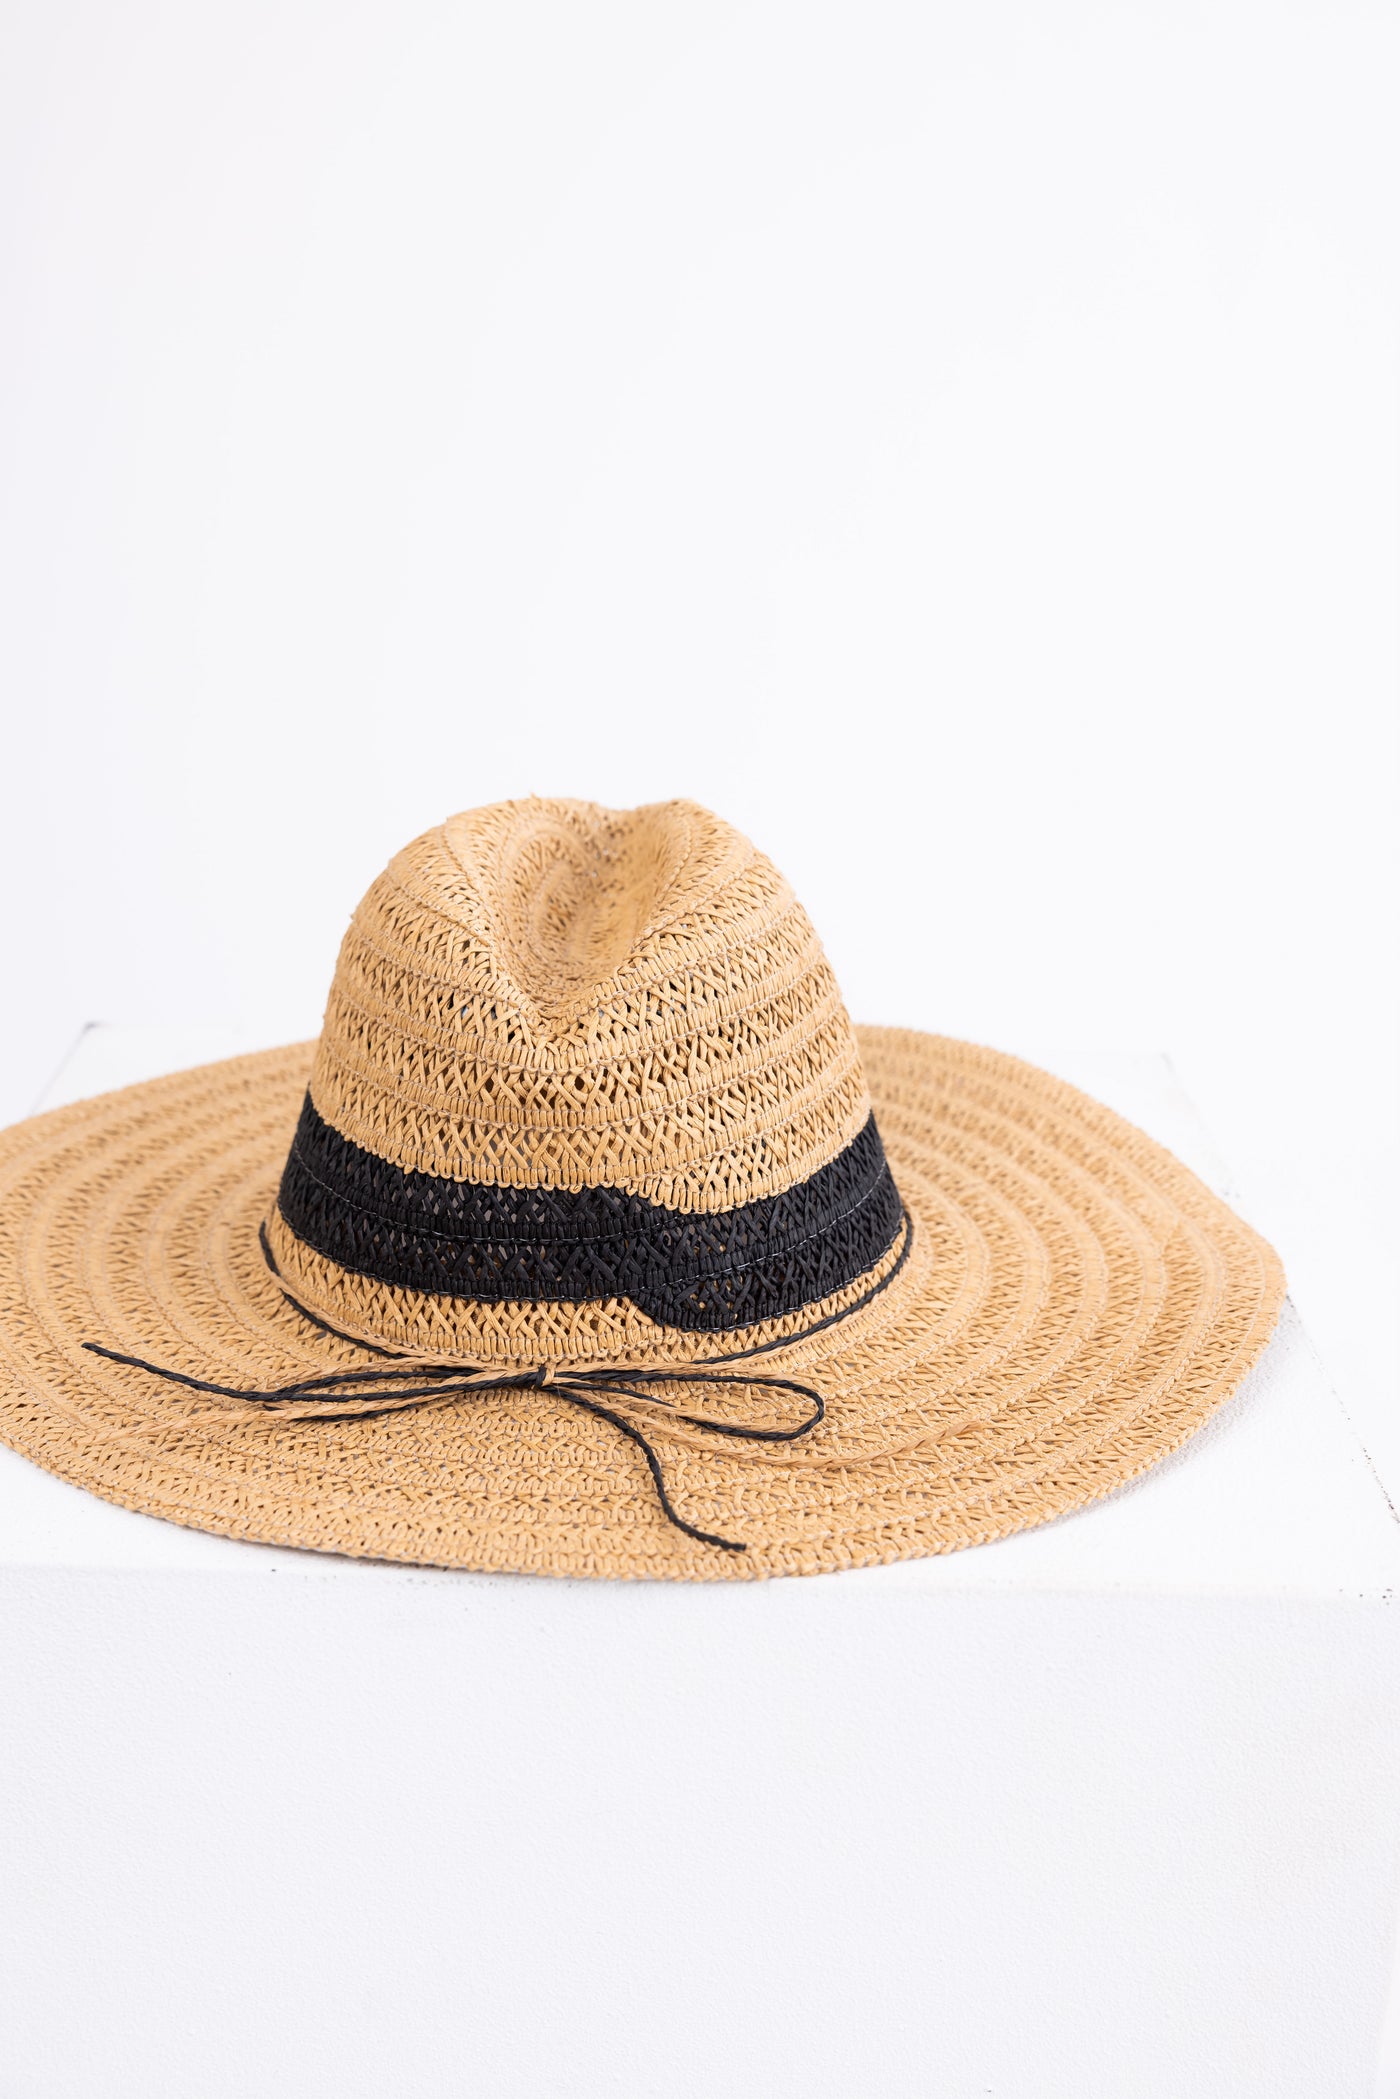 Camel Woven Straw Hat with Black Band Detail